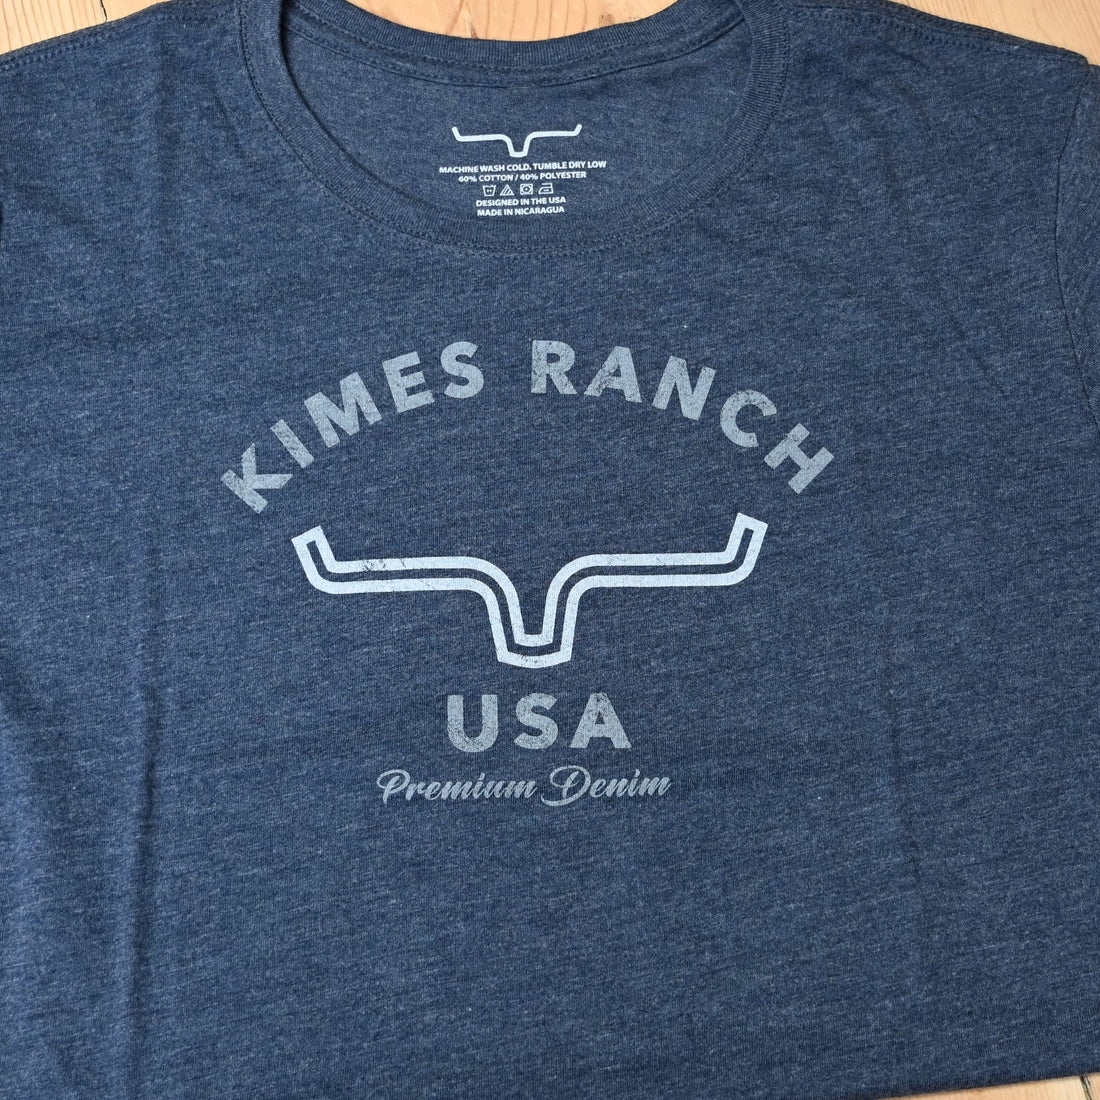 Kimes Ranch Arch Tees in Vintage Navy view of logo